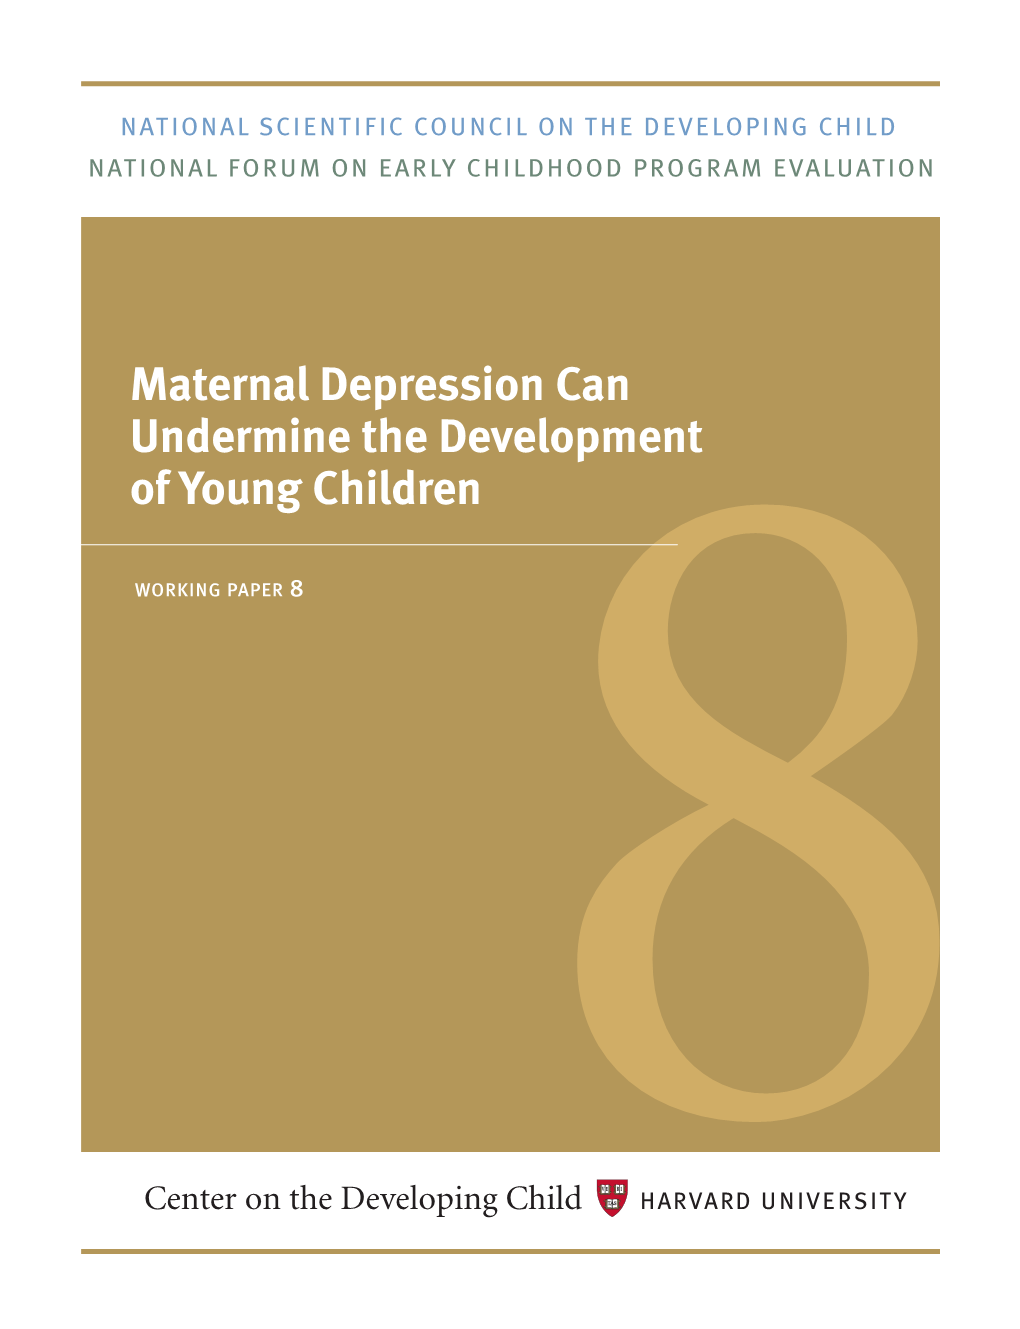 Maternal Depression Can Undermine the Development of Young Children Working Paper 8 8 National Forum on Early Childhood Program Evaluation